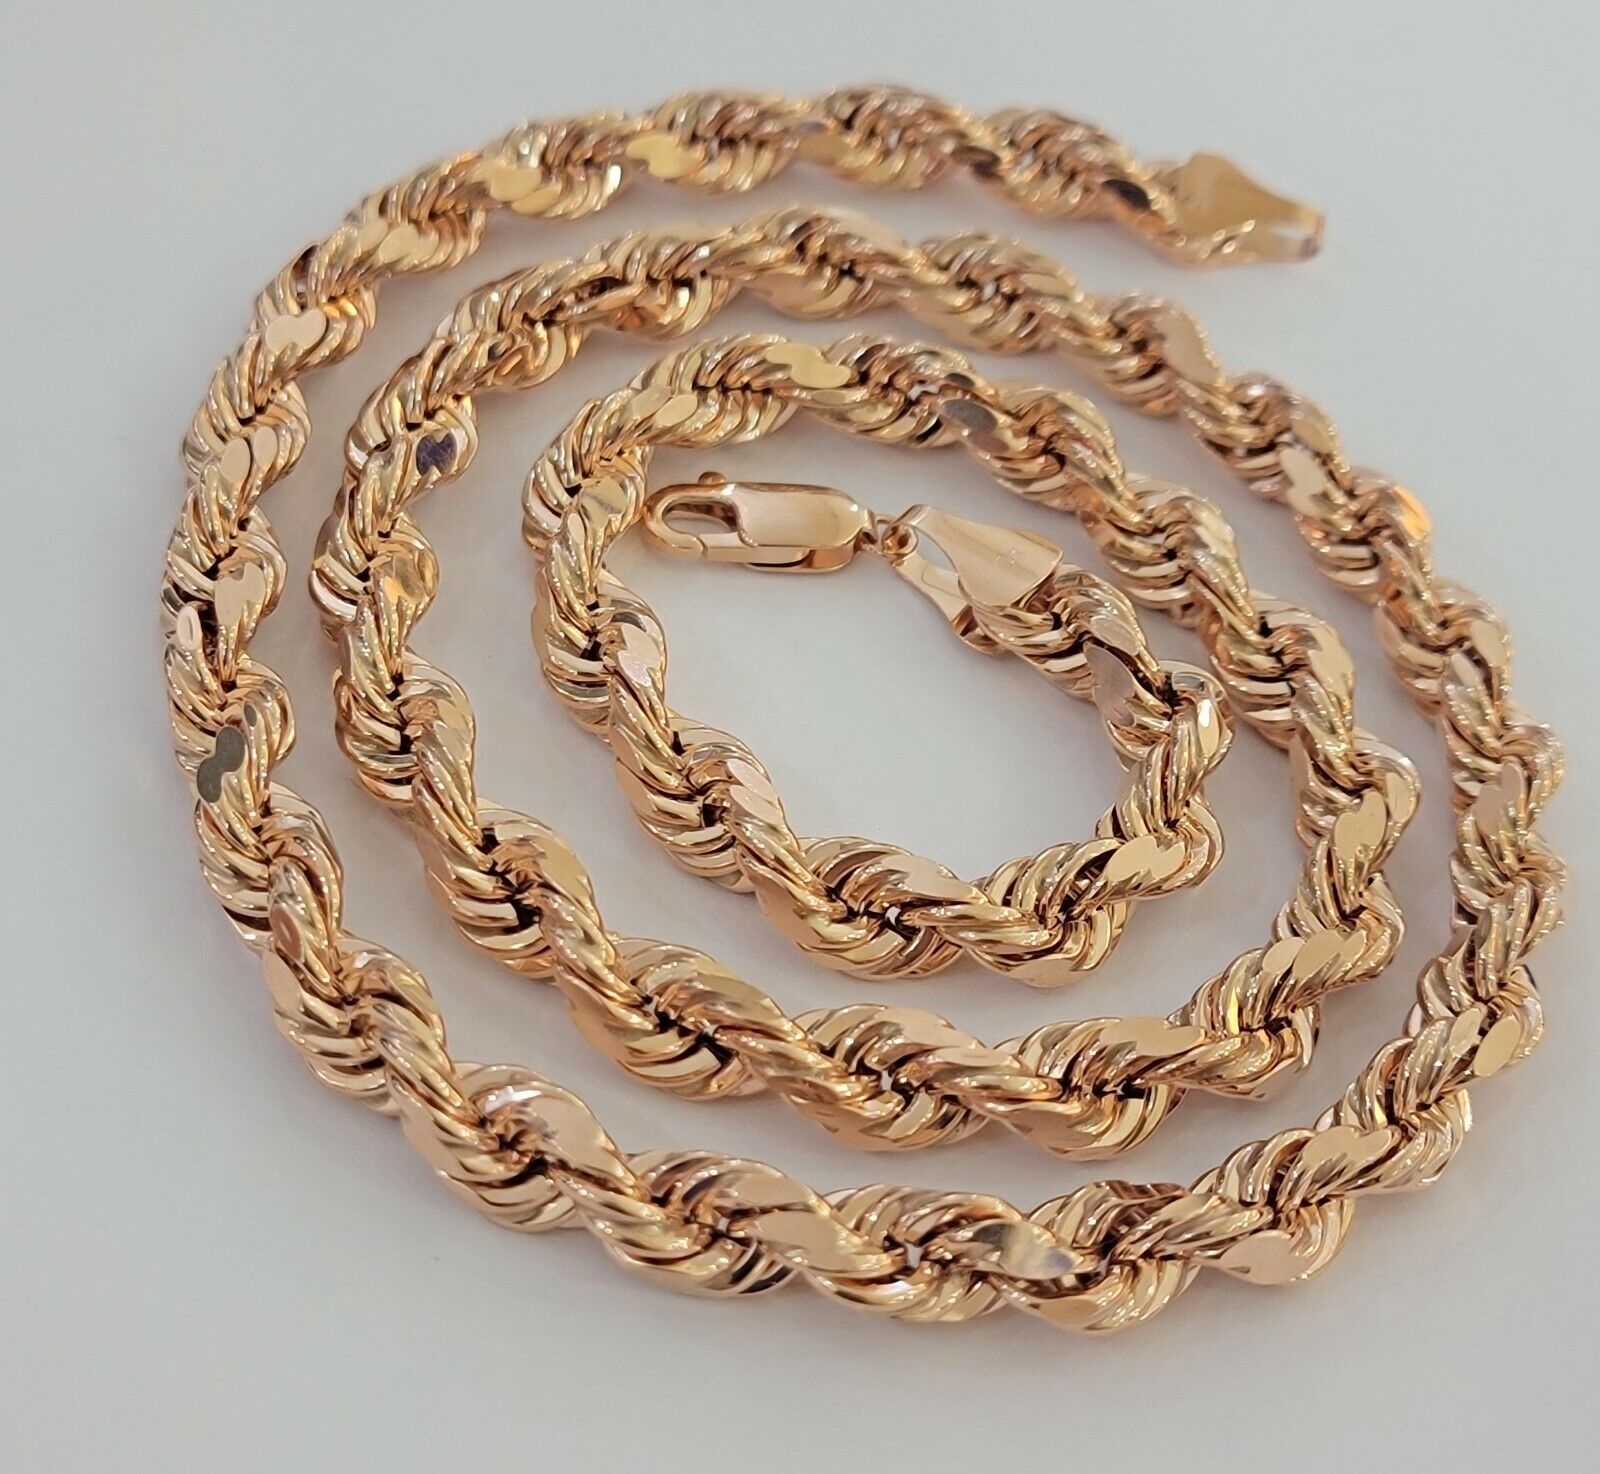 Women's 14K Gold Necklace Solid Rose Gold Rope Chain